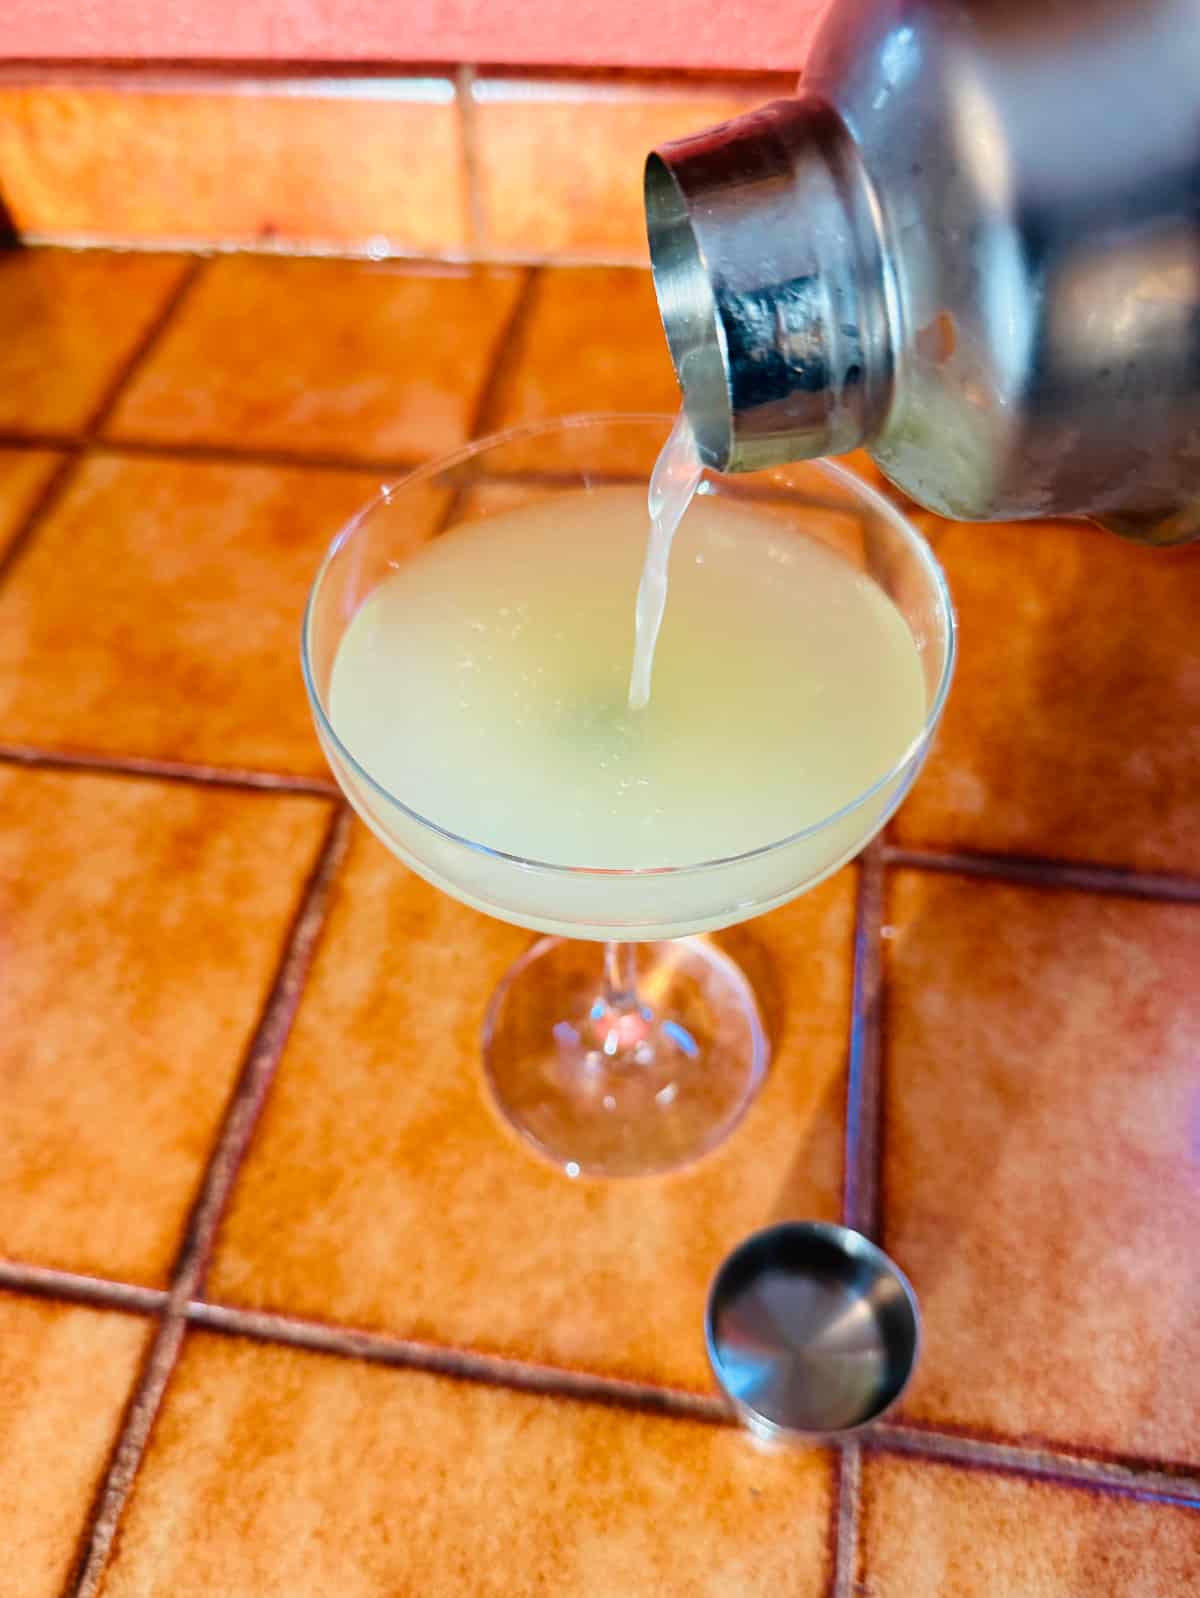 Pale green liquid being poured out of a cocktail shaker into a coupe glass.